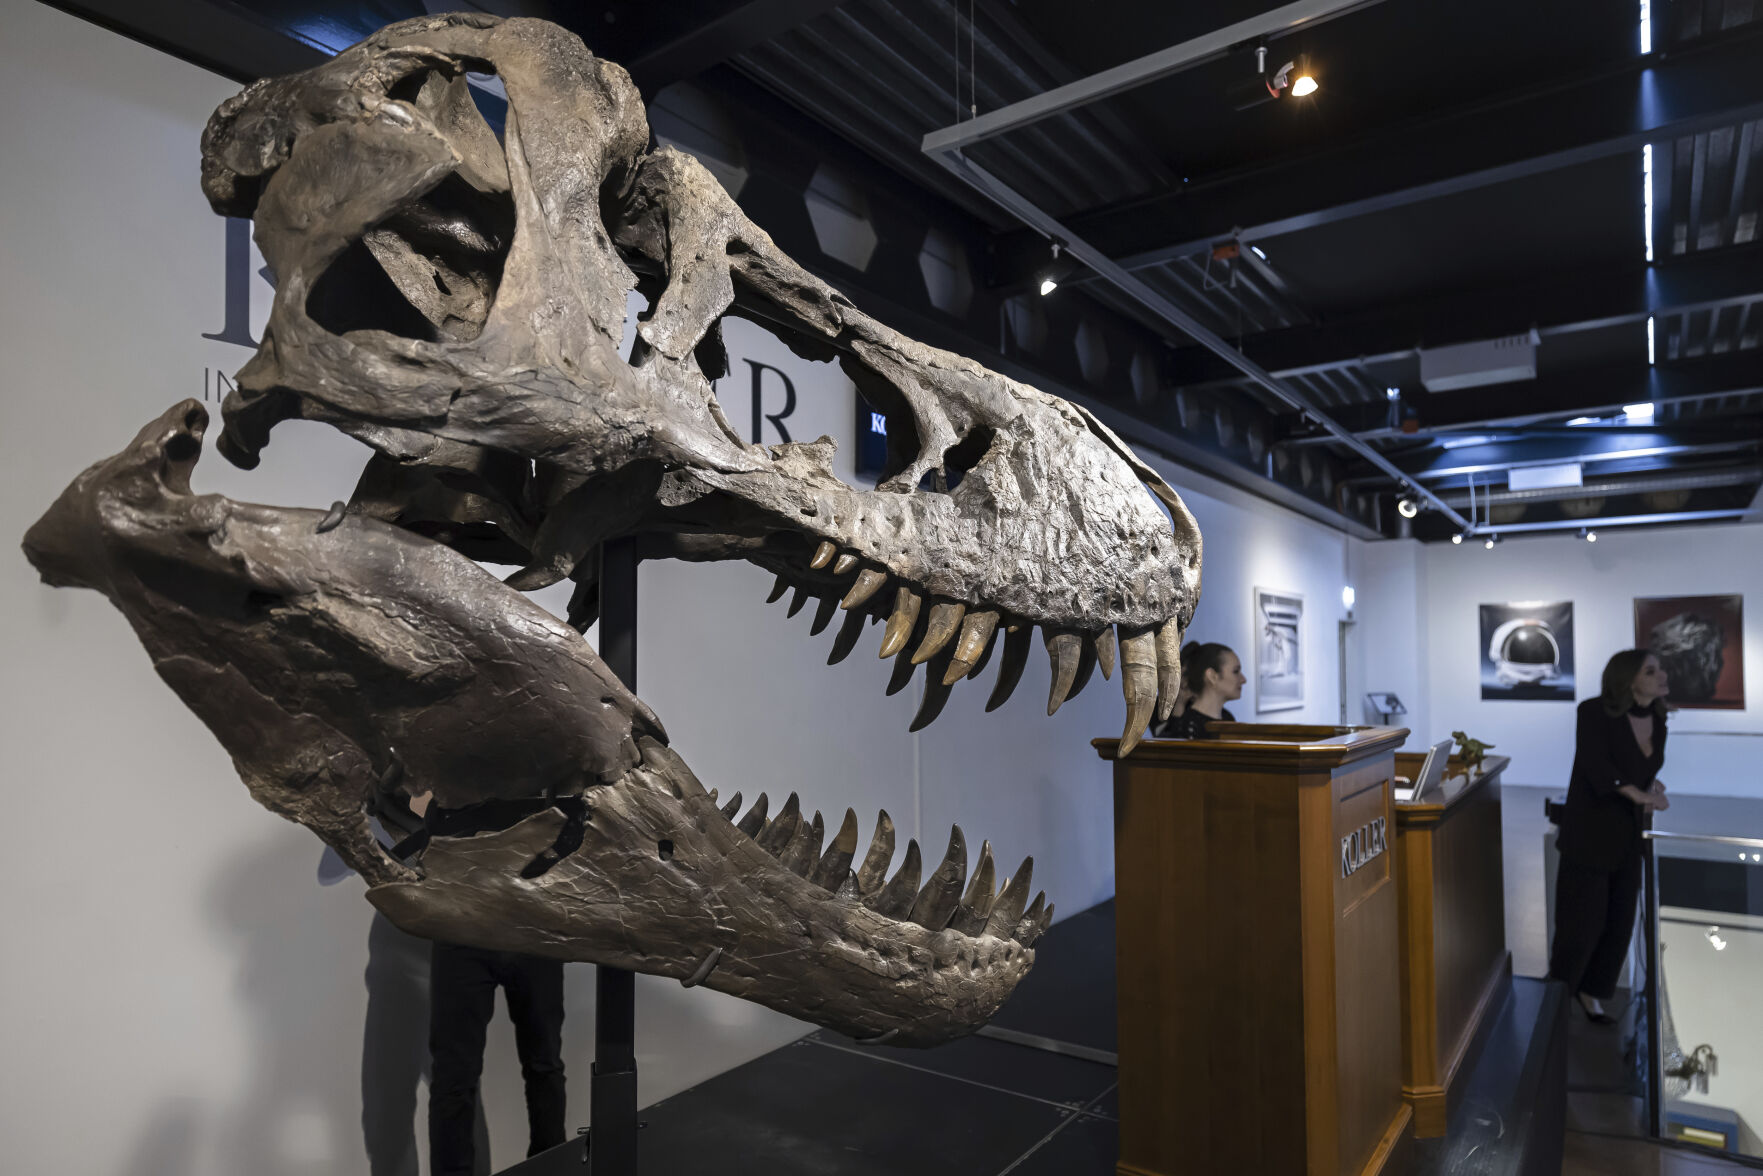 <p>The head of the skeleton of a Tyrannosaurus rex named Trinity, is seen during an auction in Zurich, Switzerland on Tuesday, April 18, 2023. The 293 T. rex bones were assembled into a growling posture that measures 11.6 meters long (38 feet long) and 3.9 meters high (12.8 feet high. The skeleton is expected to fetch 5 million to 8 million Swiss francs ($5.6-$8.9 million). (Michael Buholzer/Keystone via AP)</p>   PHOTO CREDIT: Michael Buholzer - foreign subscriber, Keystone